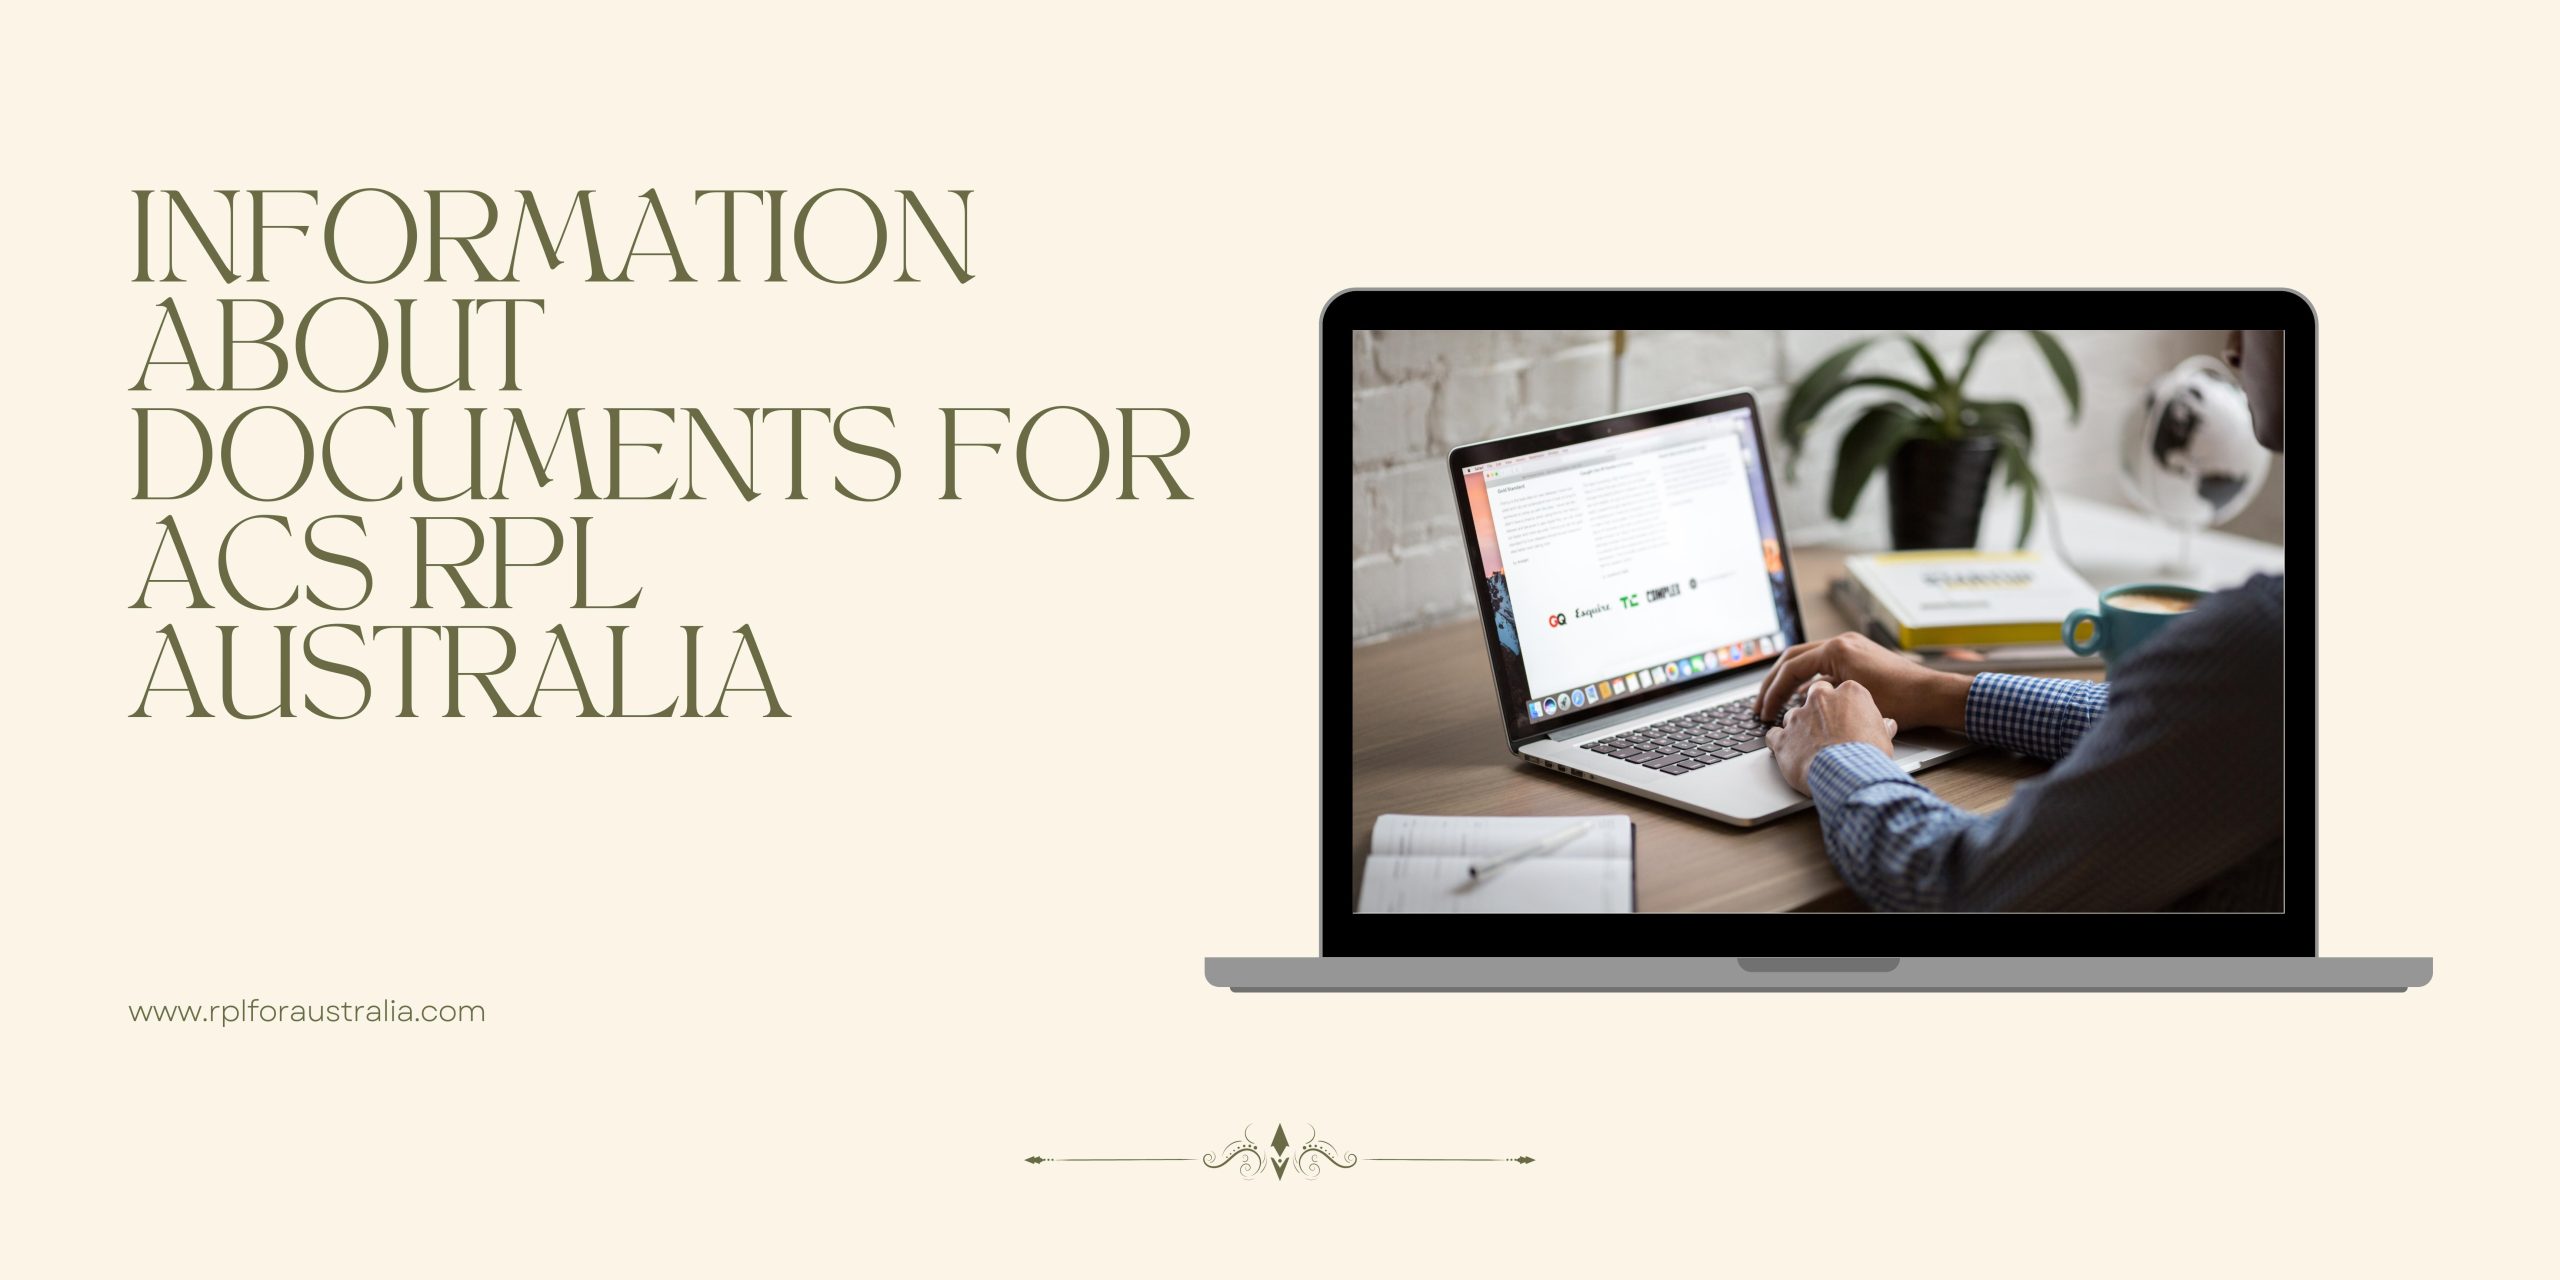 Information About Documents for ACS RPL Australia